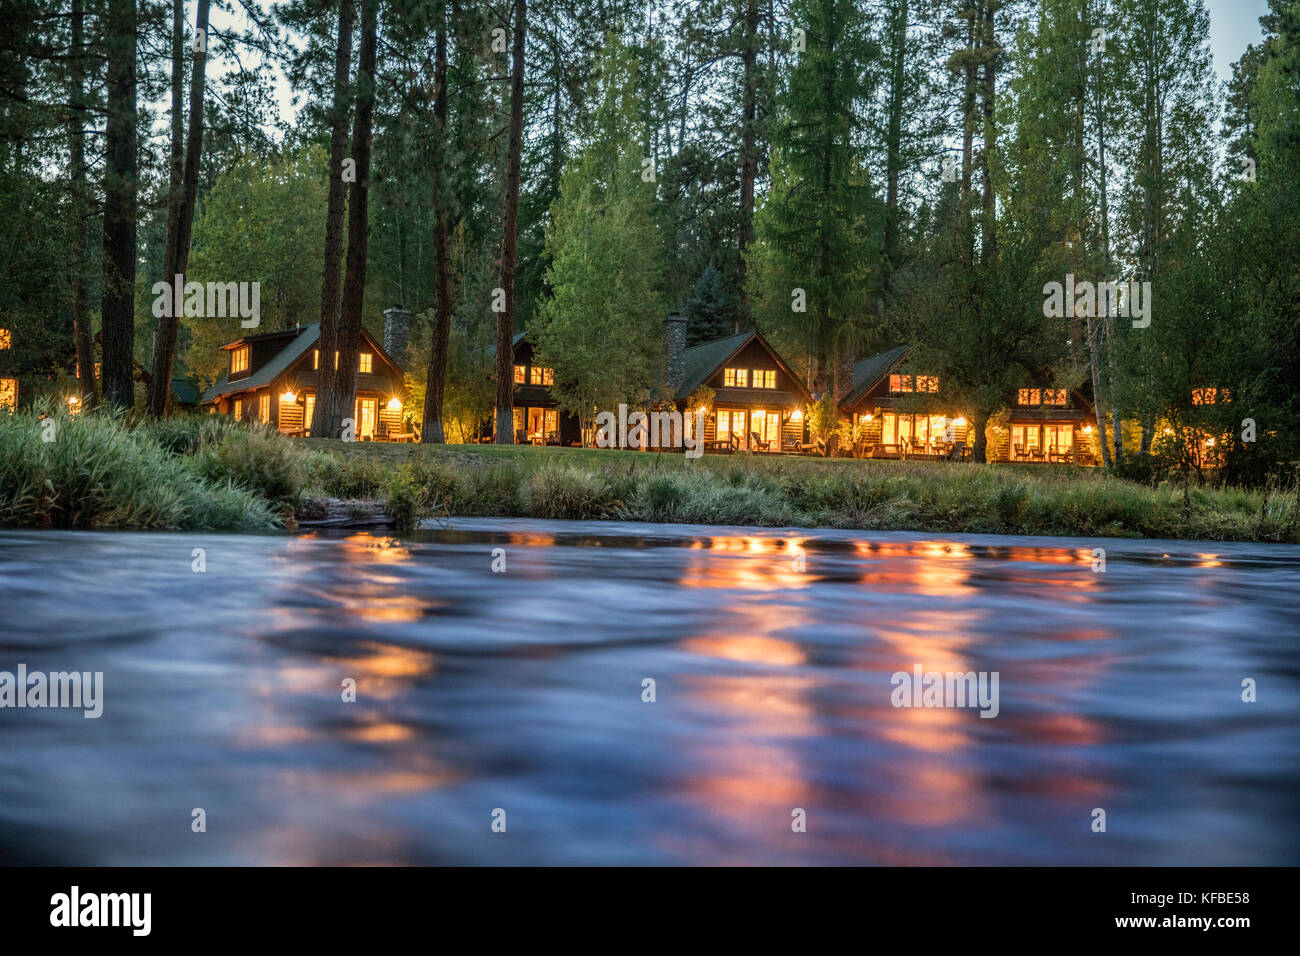 USA, Oregon, Camp Sherman, Metolius River Resort, View of cabins from River Stock Photo